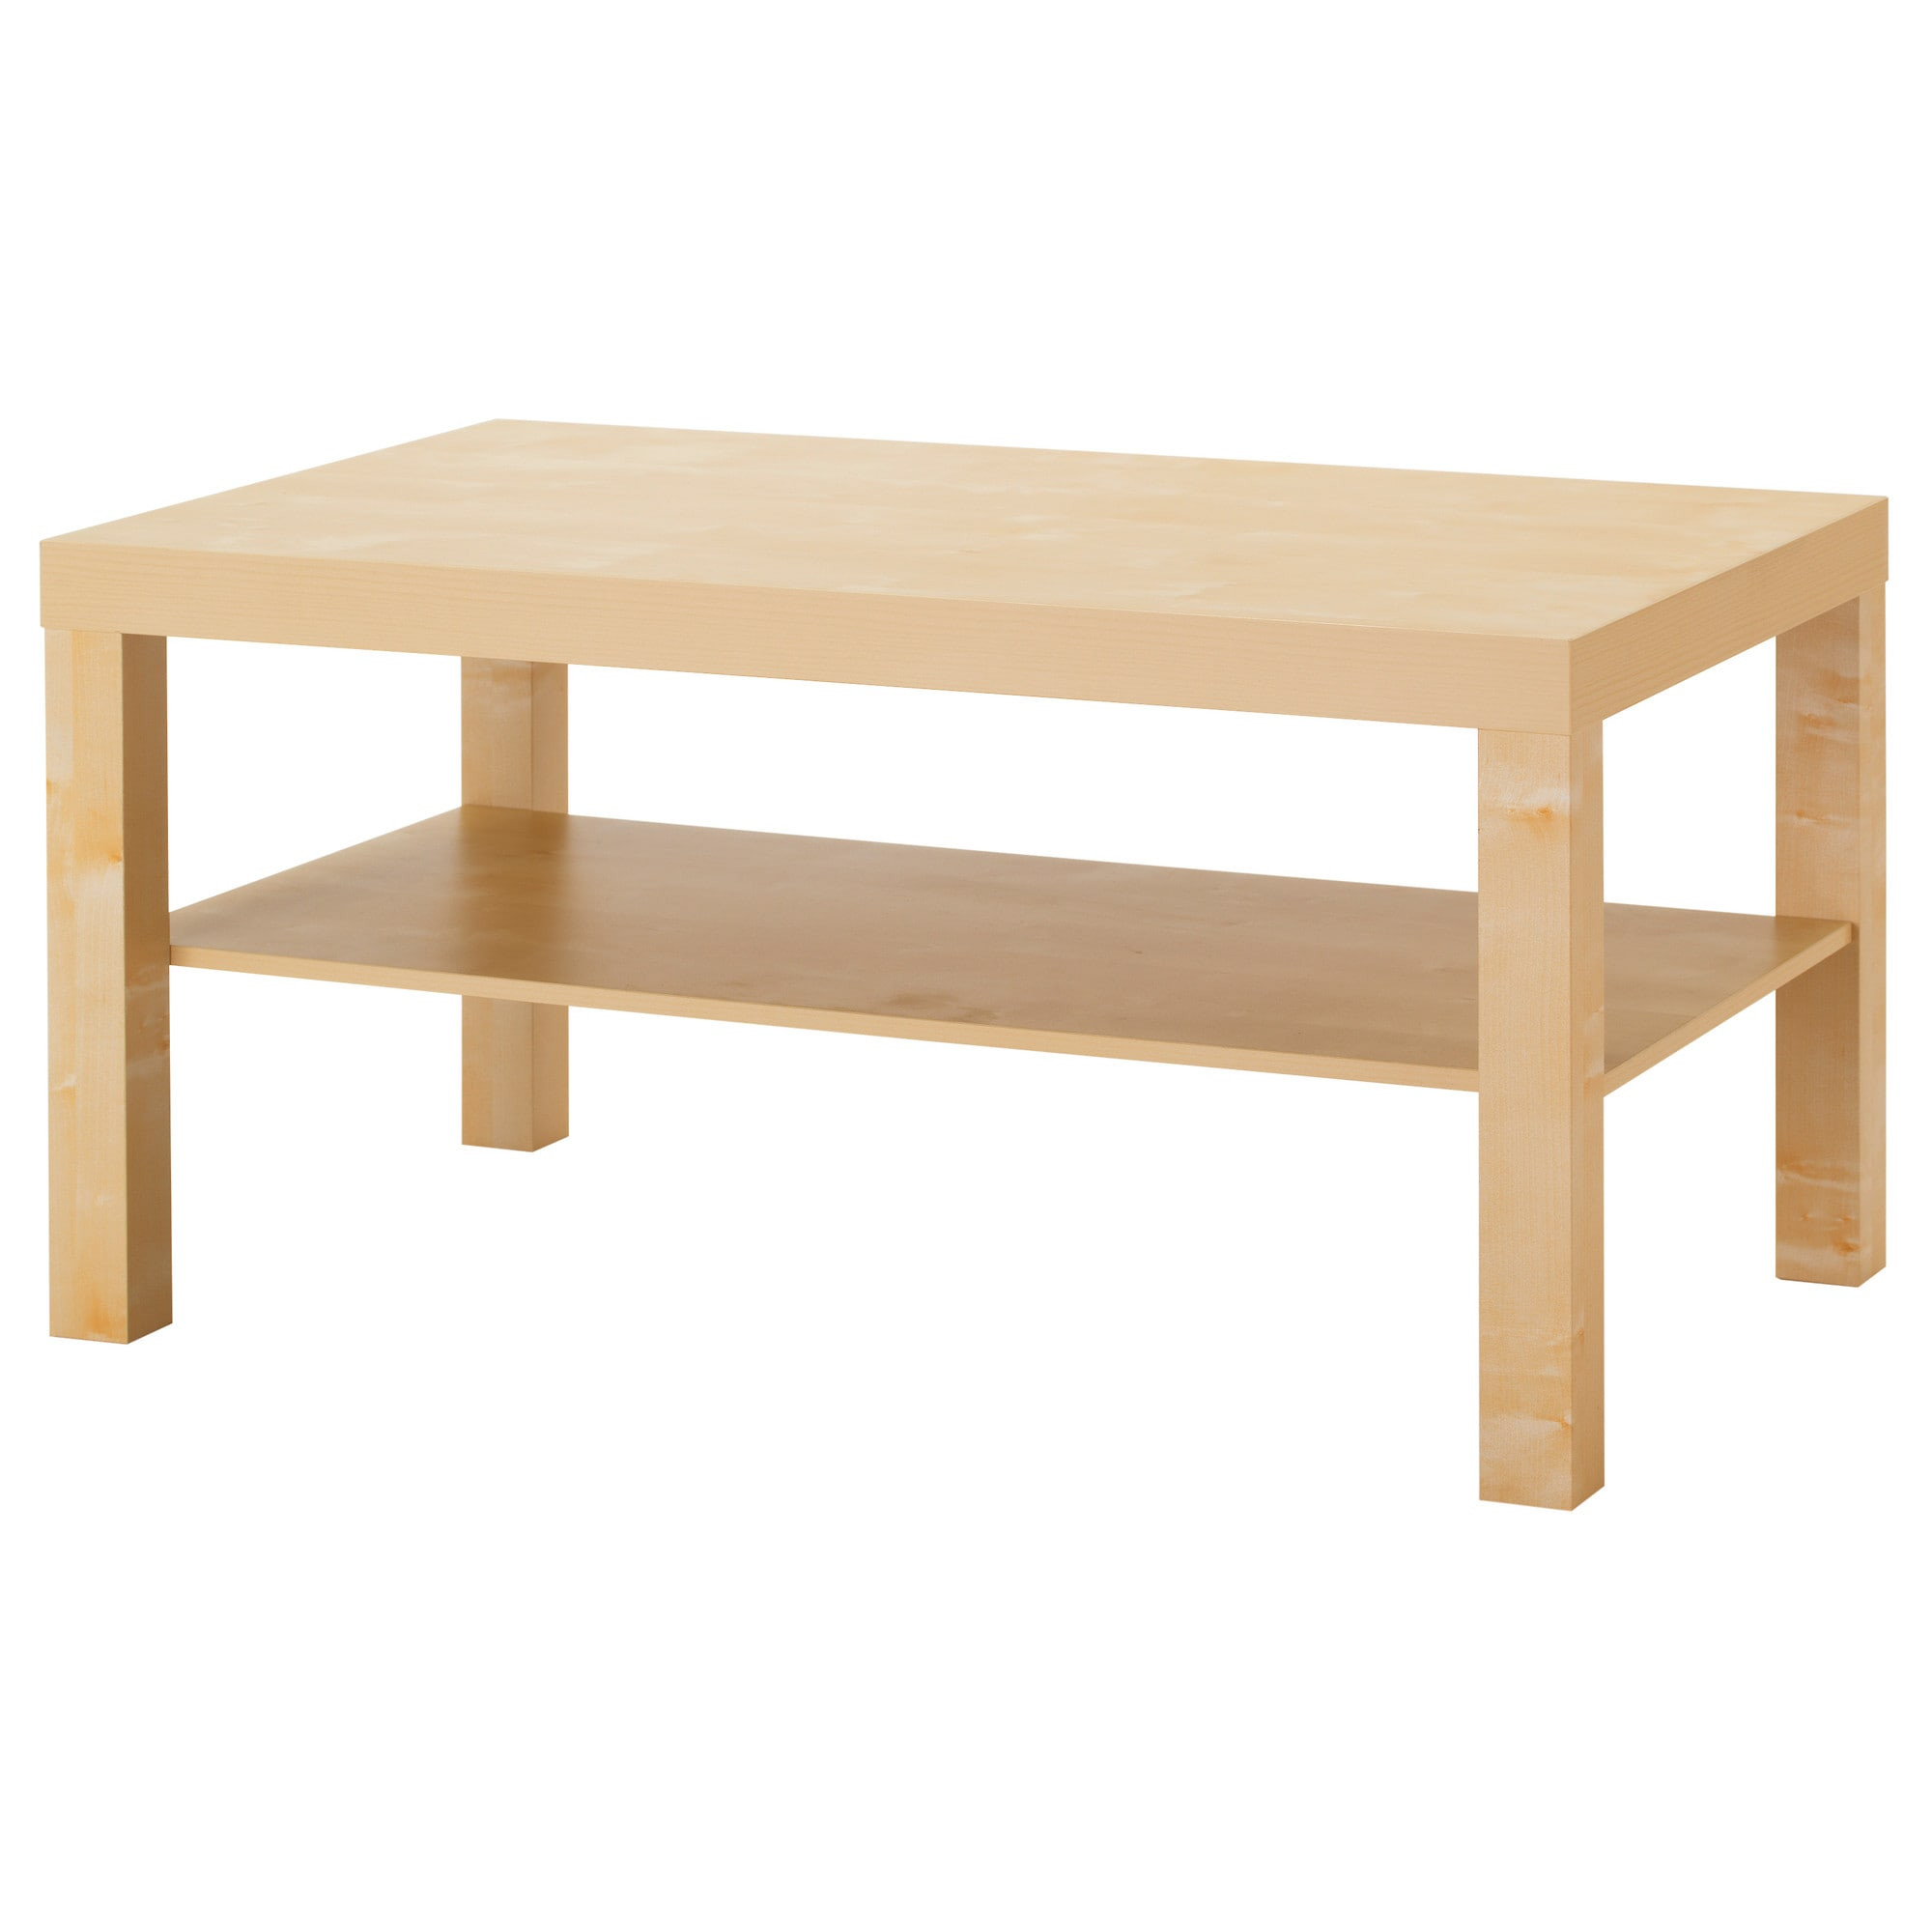 Best ideas about Ikea Coffee Table
. Save or Pin LACK Coffee table Birch effect 90 x 55 cm IKEA Now.